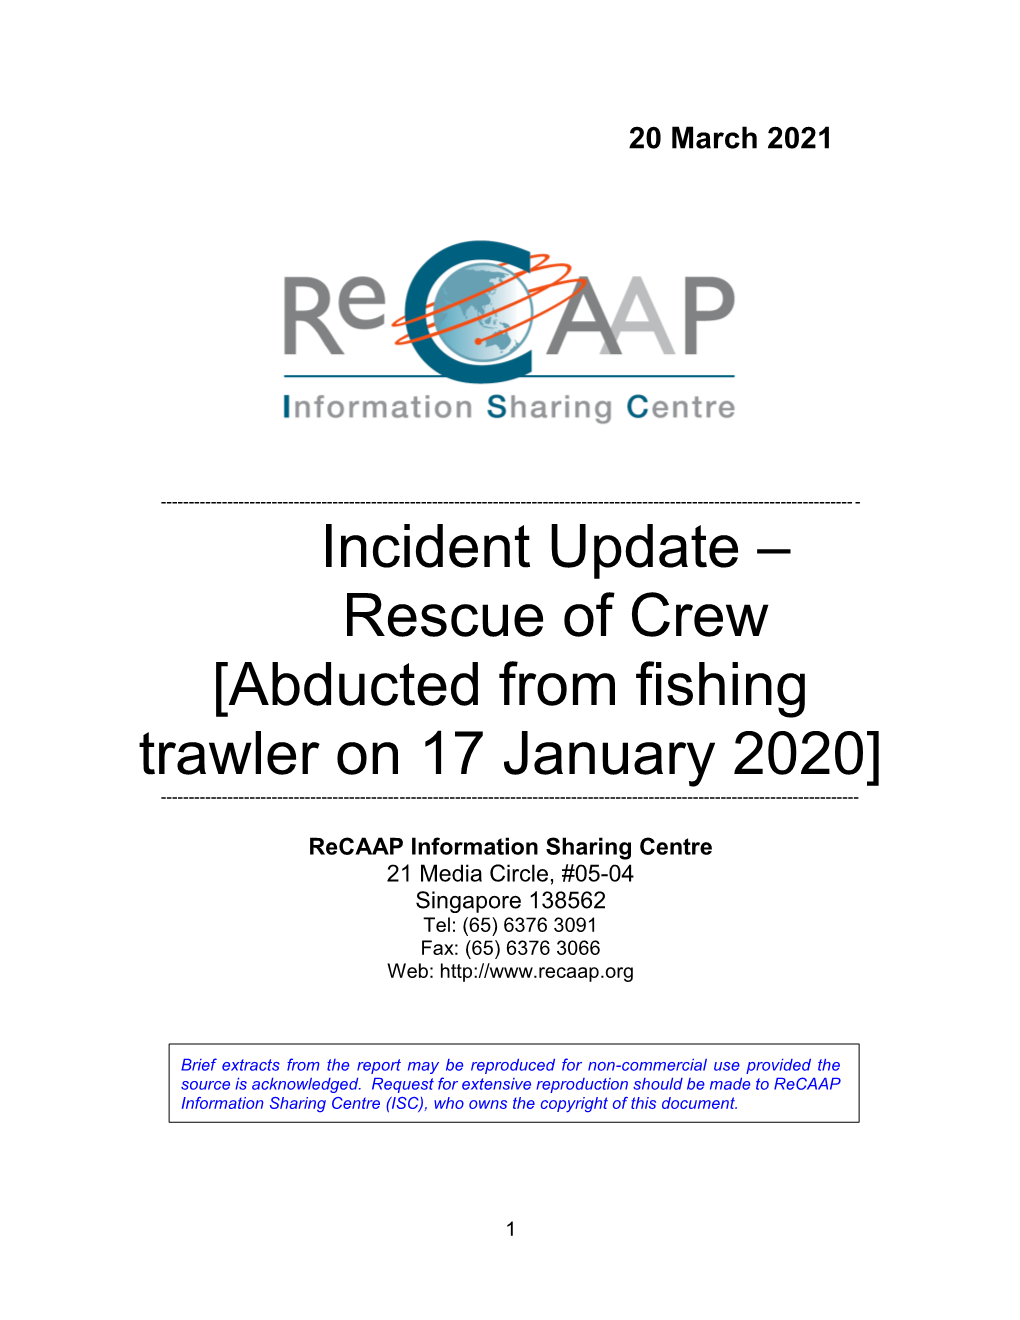 Incident Update on the Rescue of Abducted Crew